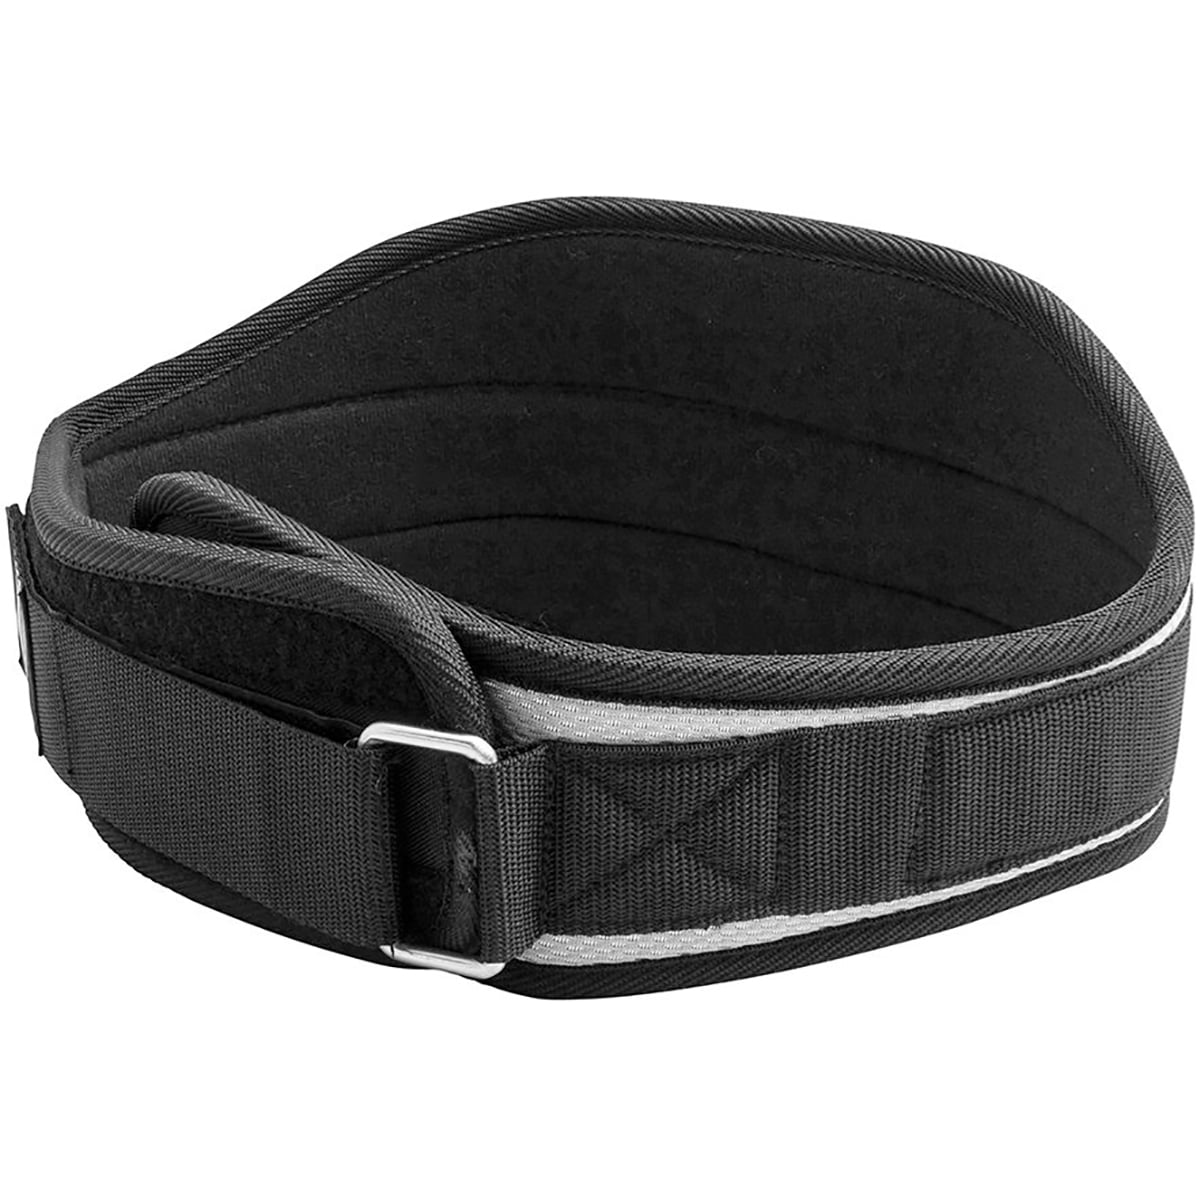 Details about   Lift Tech Fitness 4" Comp Padded Leather Weight Lifting Belt Black 